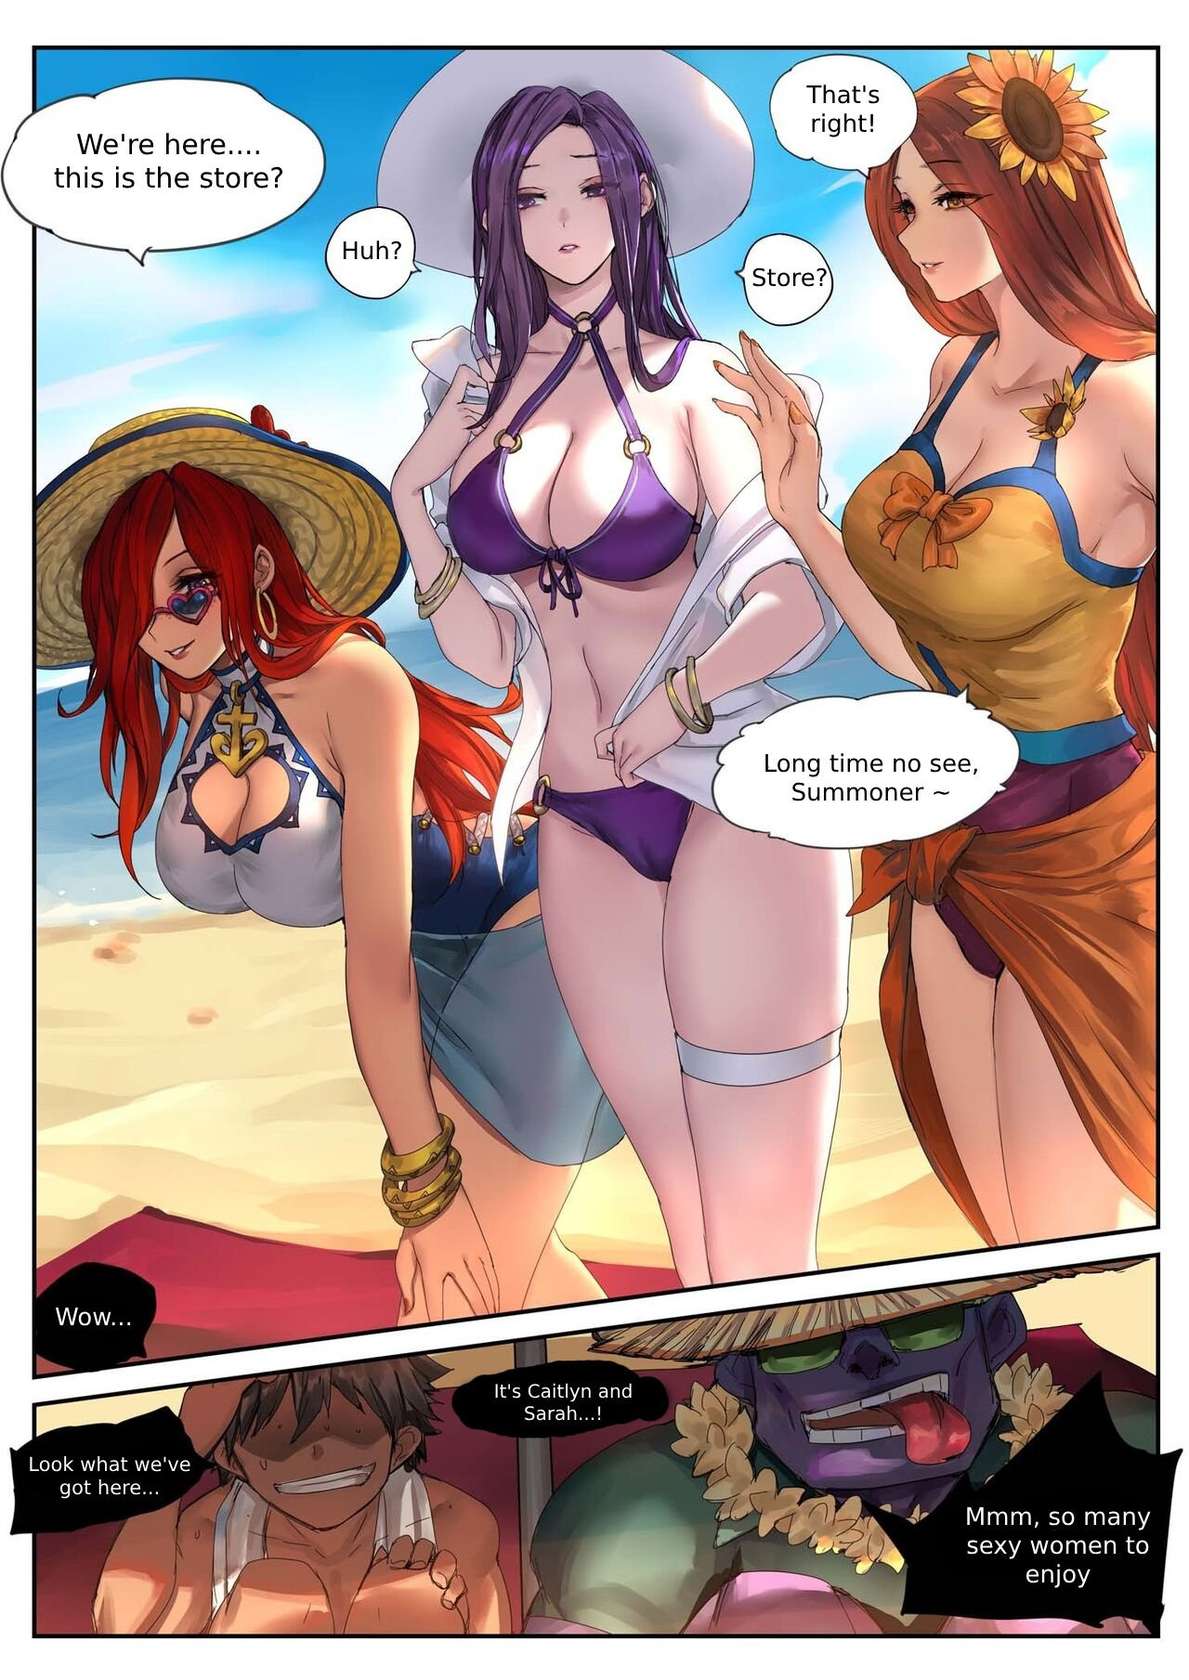 [Pd] Pool Party - Summer in Summoner's Rift 2 [English]